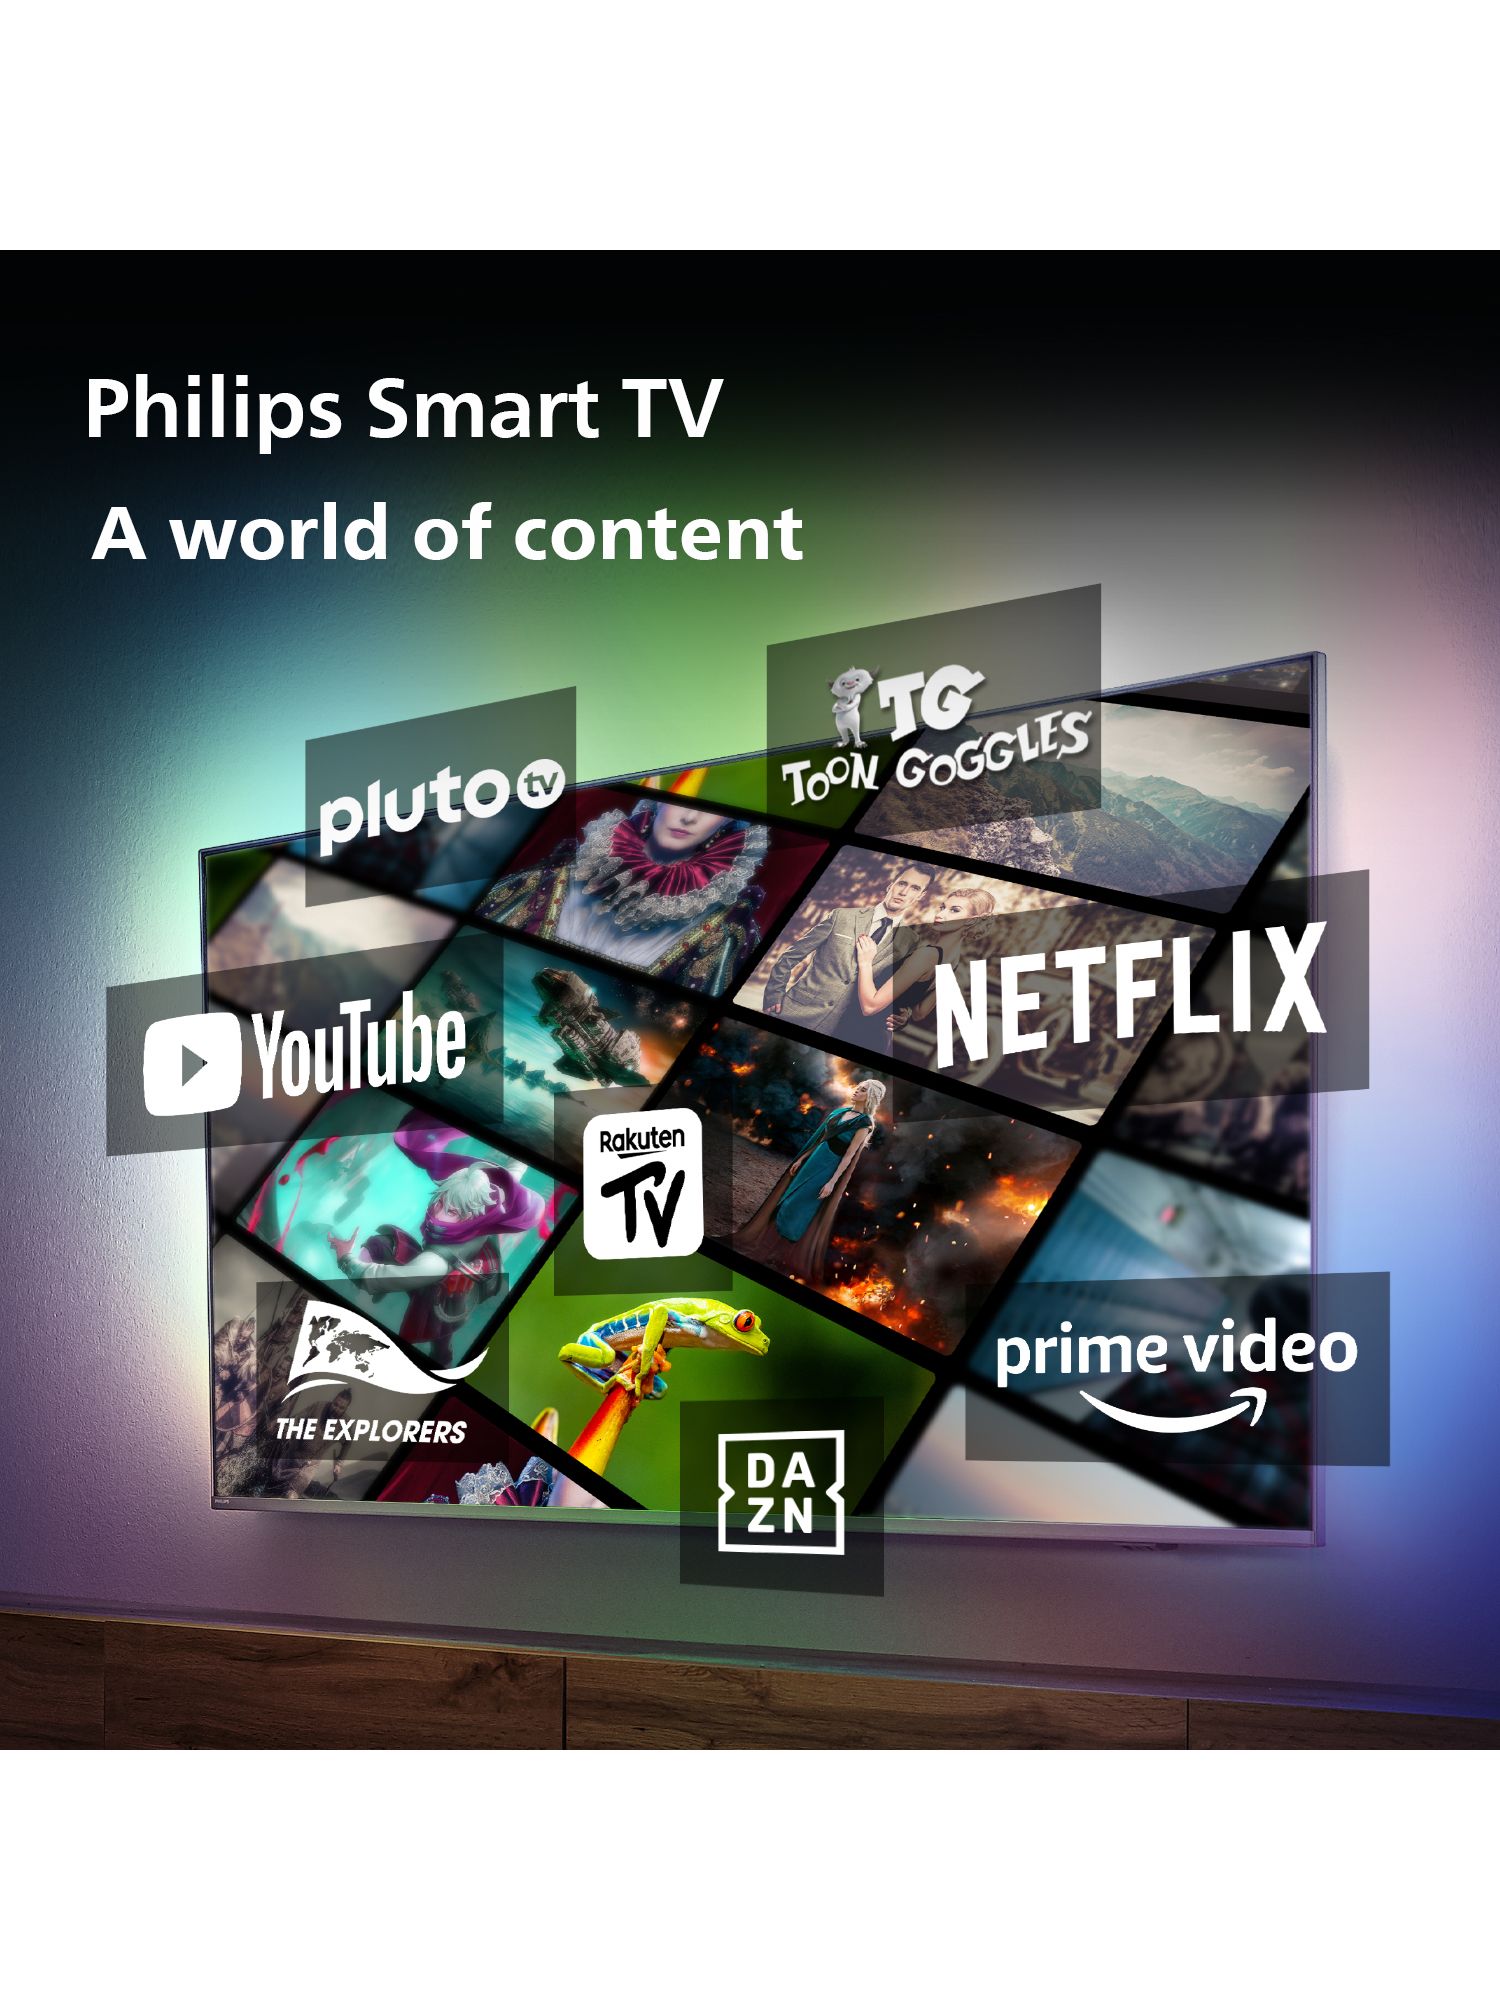 Philips 50PUS8108 (2023) LED HDR 4K Ultra HD Smart TV, 50 inch